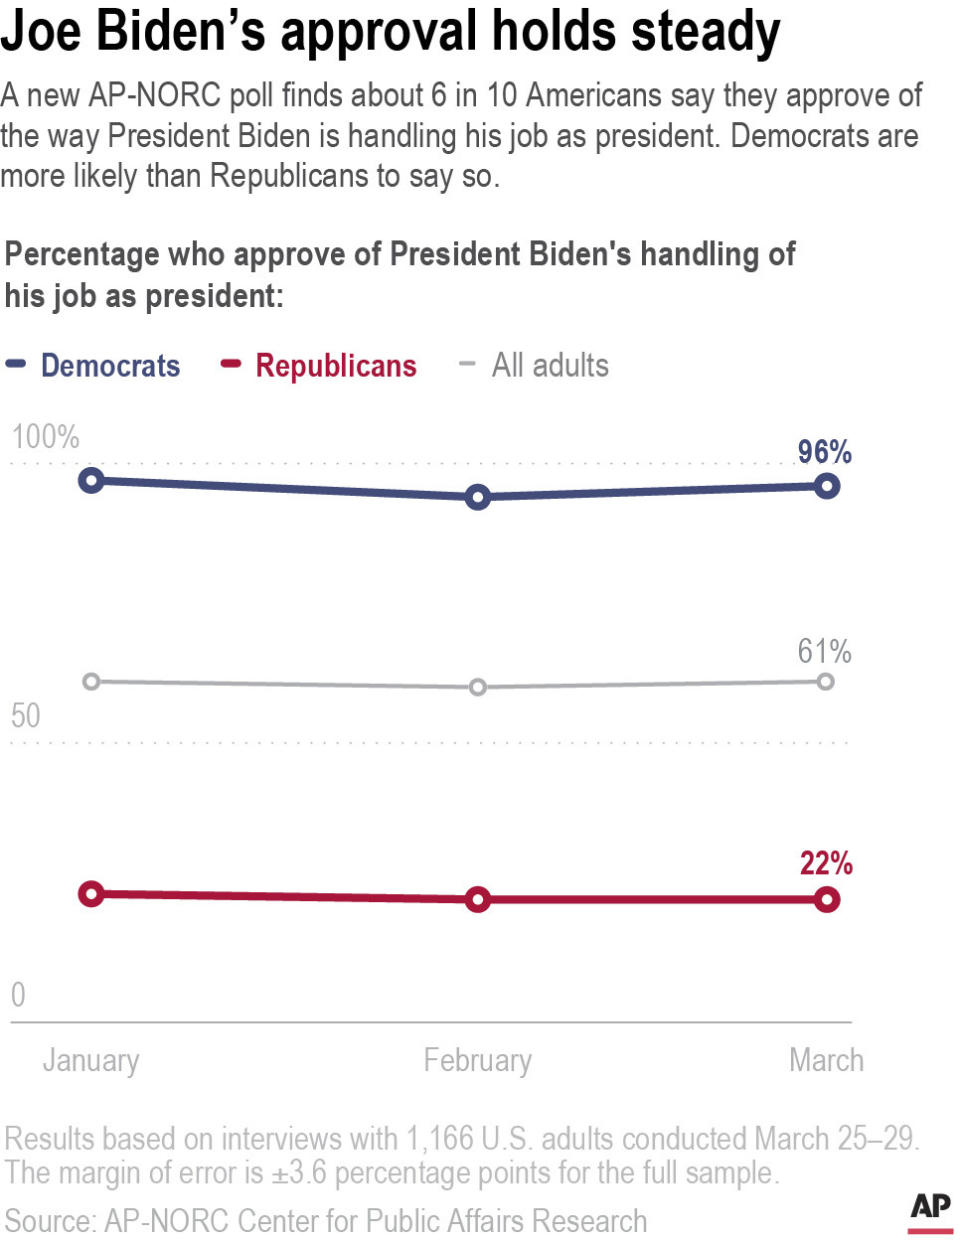 A new AP-NORC poll finds about 6 in 10 Americans say they approve of the way President Biden is handling his job as president. Democrats are more likely than Republicans to say so.